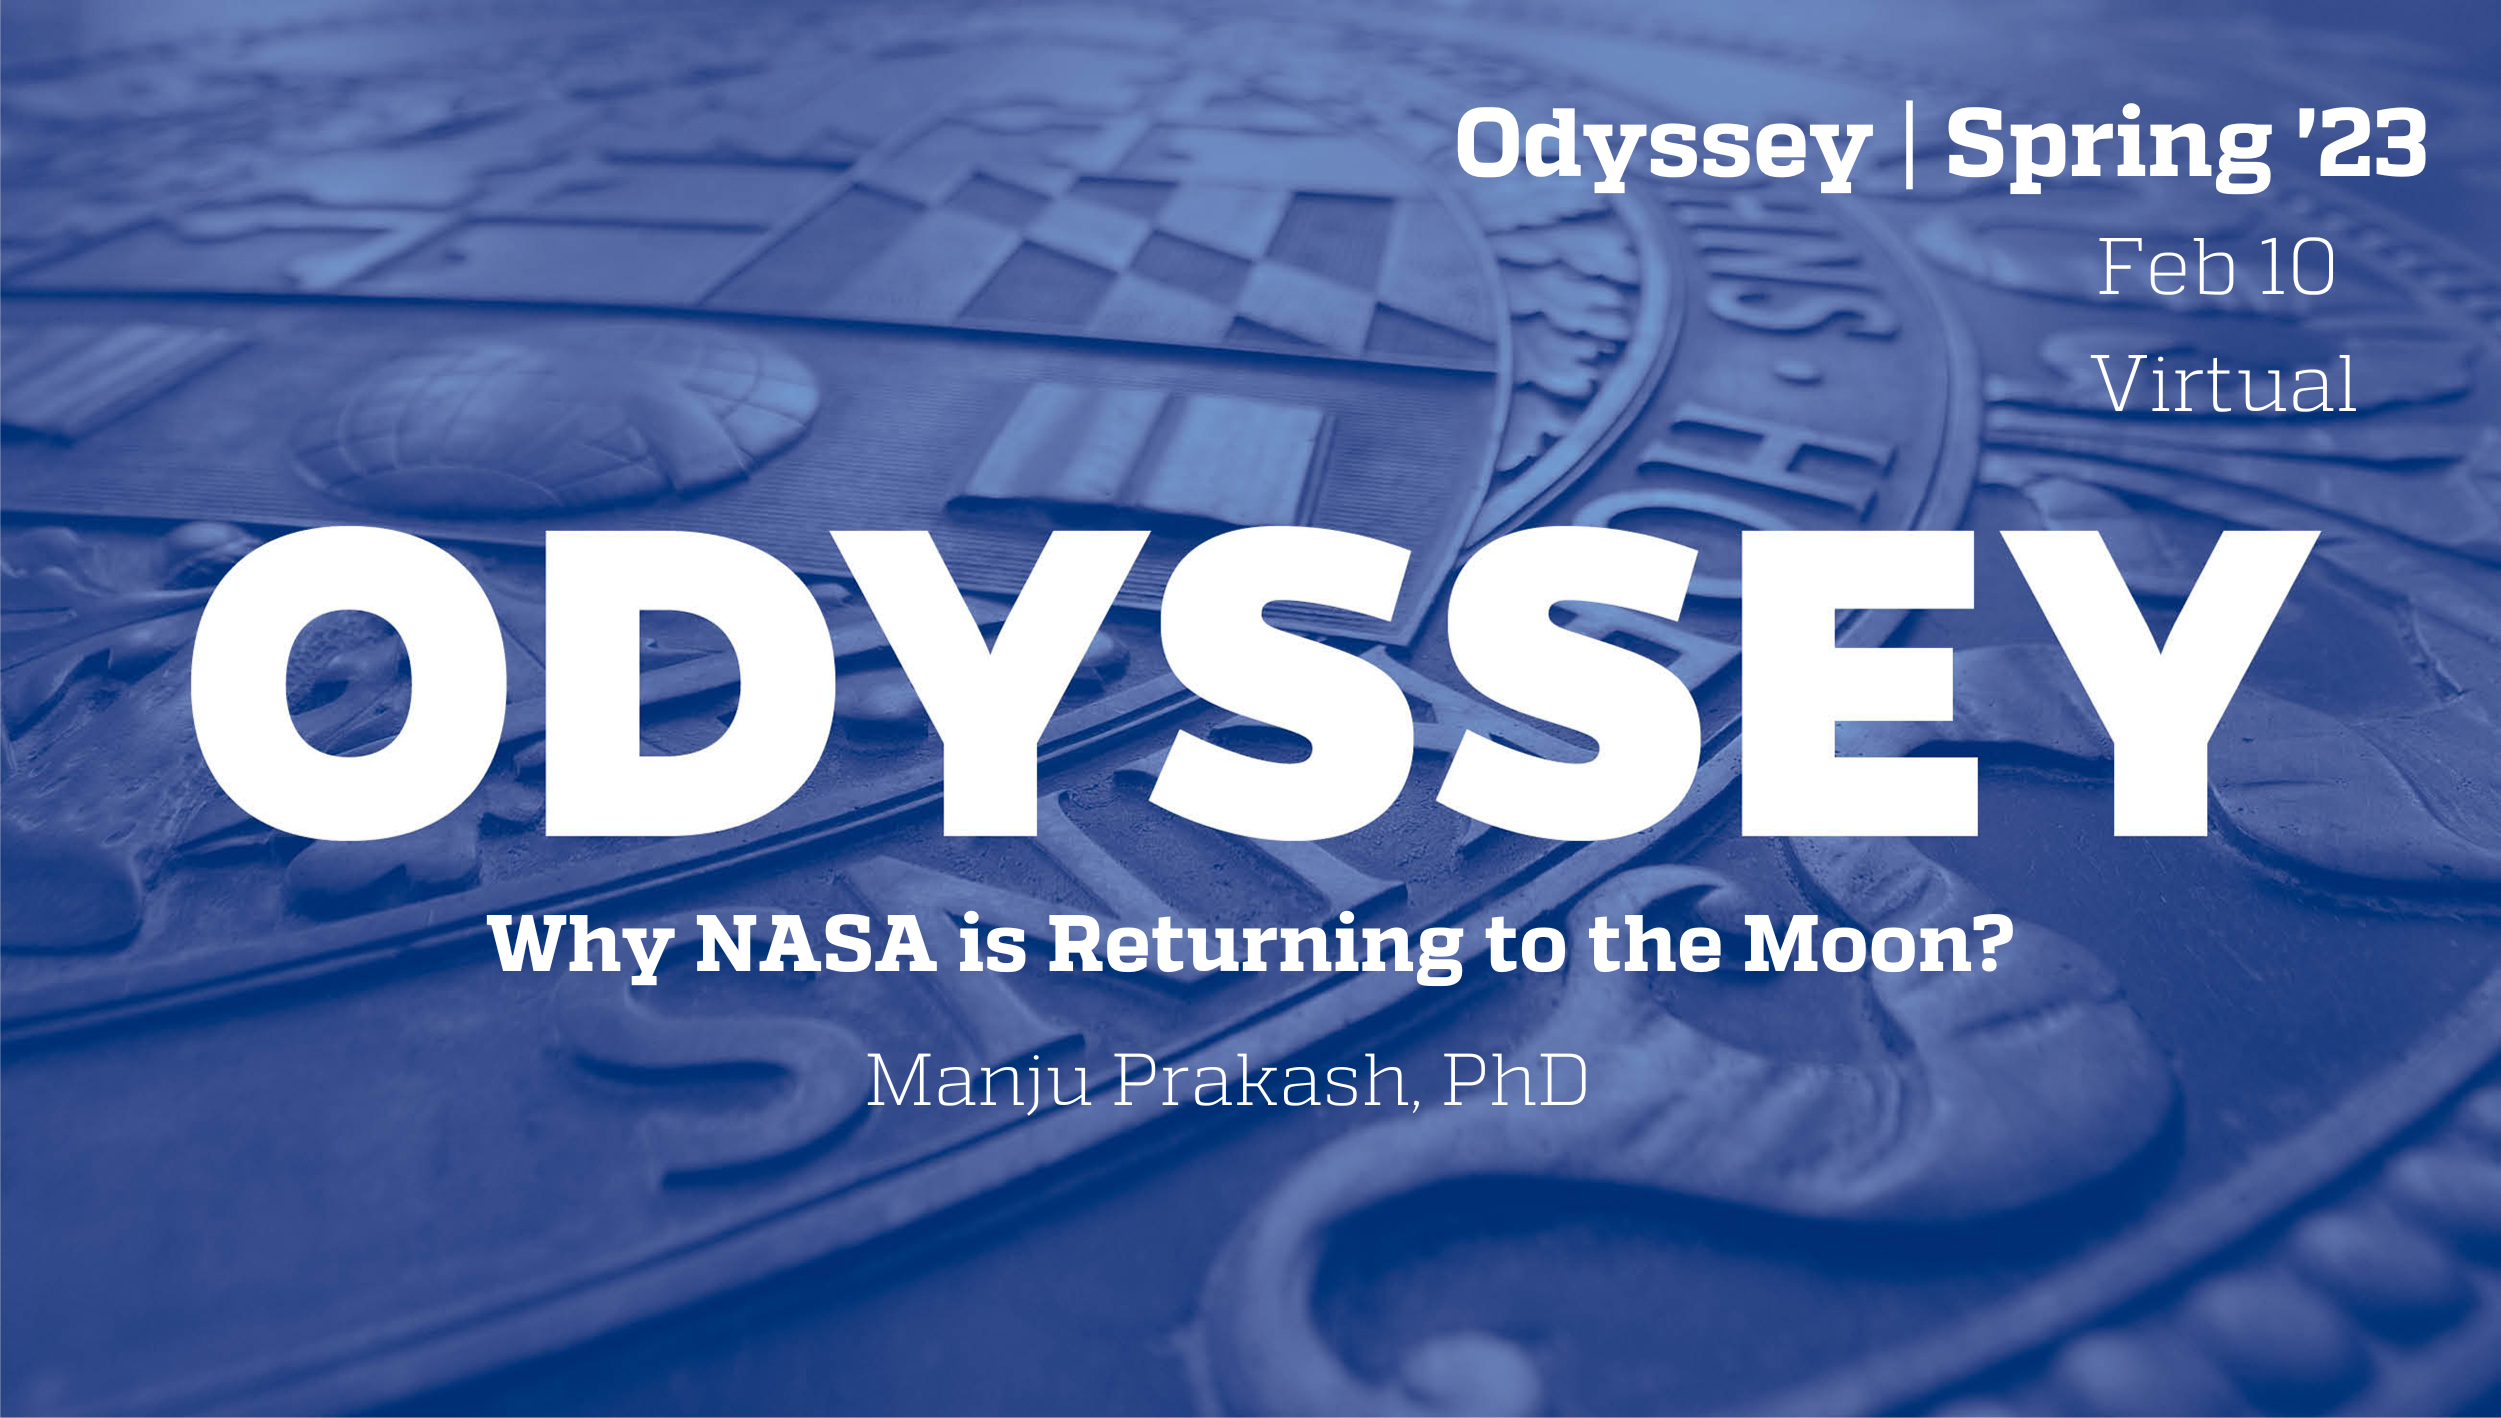 Why NASA is Returning to the Moon